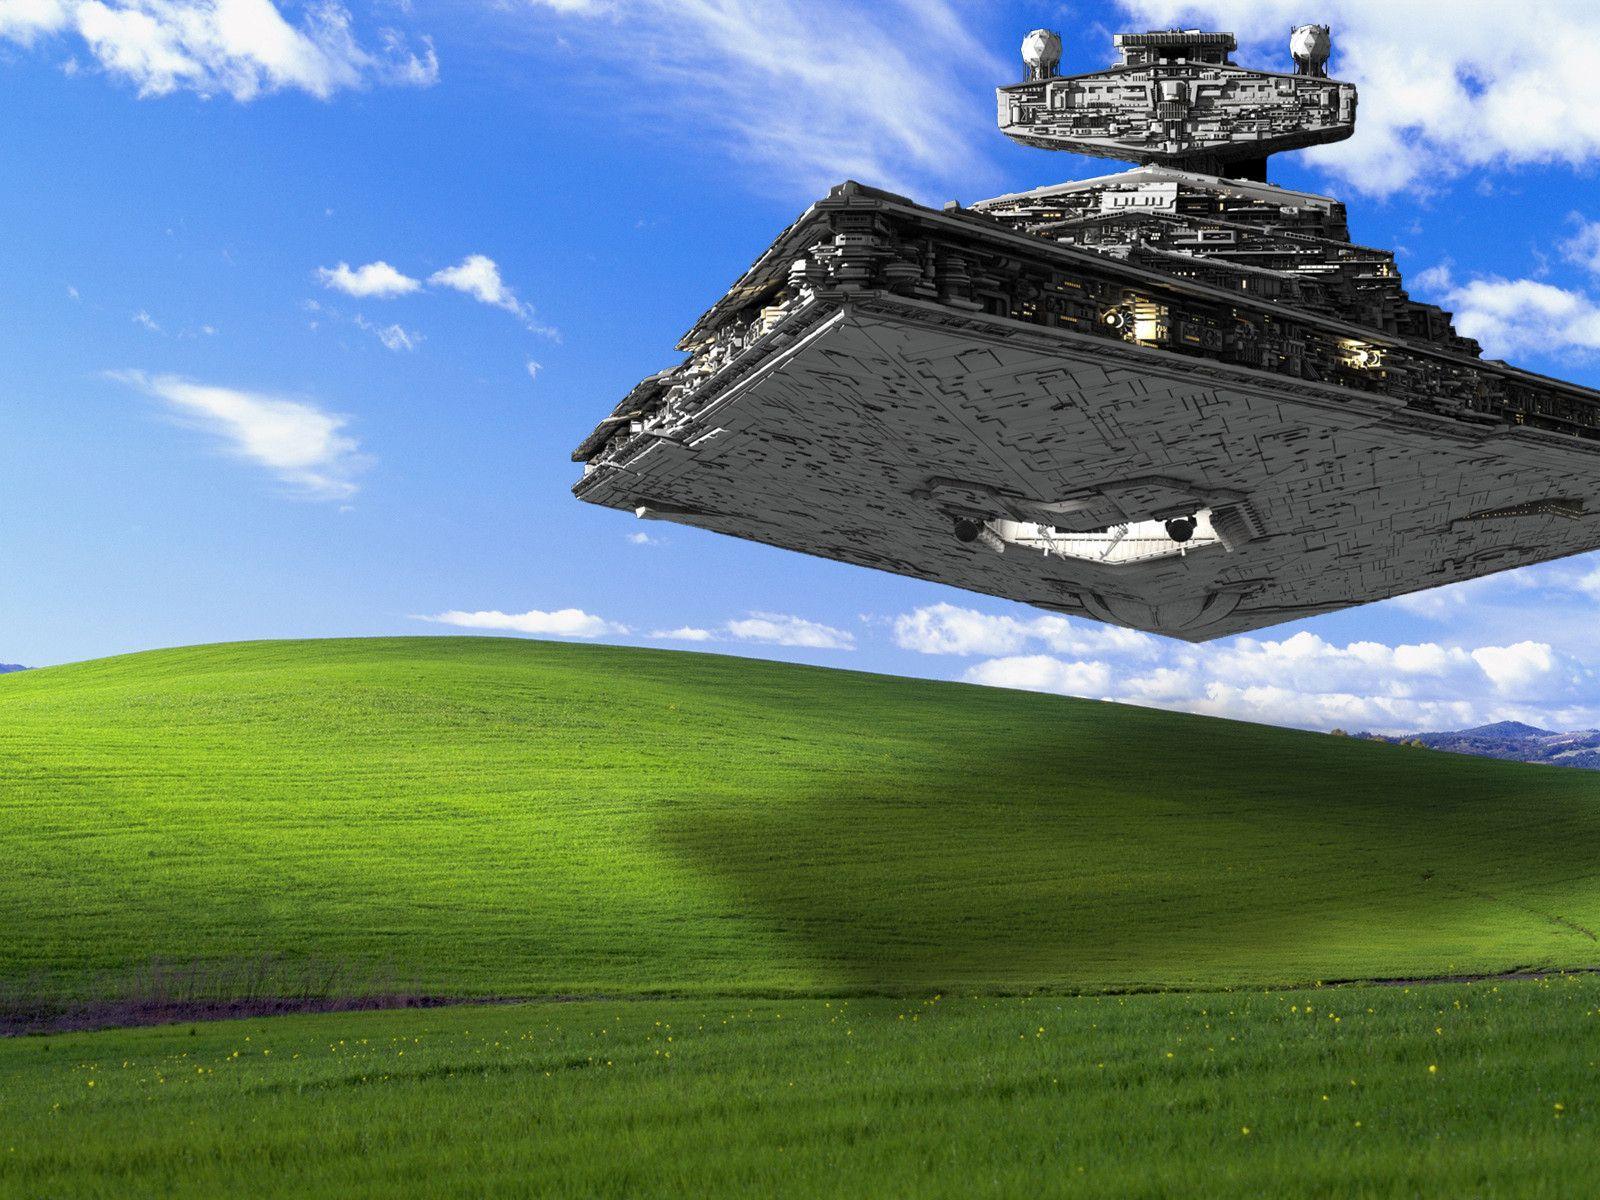 × 1200 Star Destroyer Wallpaper. So, this is what I&;m thinking